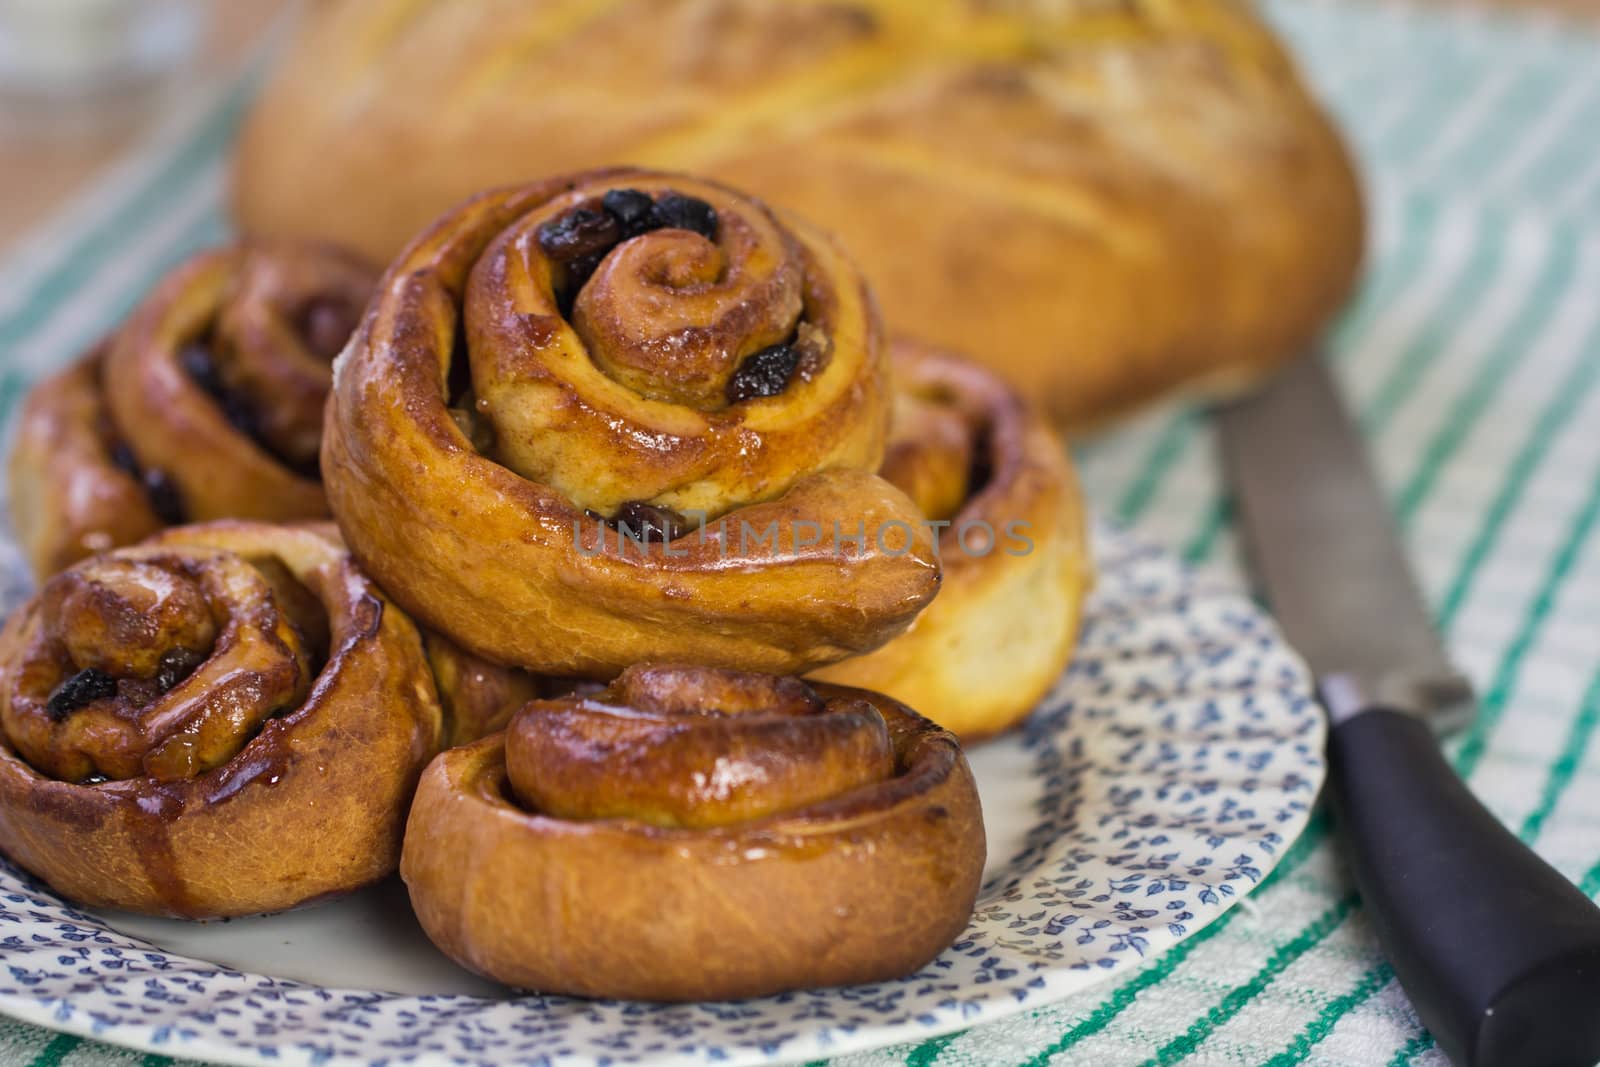 Fresh sticky Chelsea buns and a loaf of bread with knife